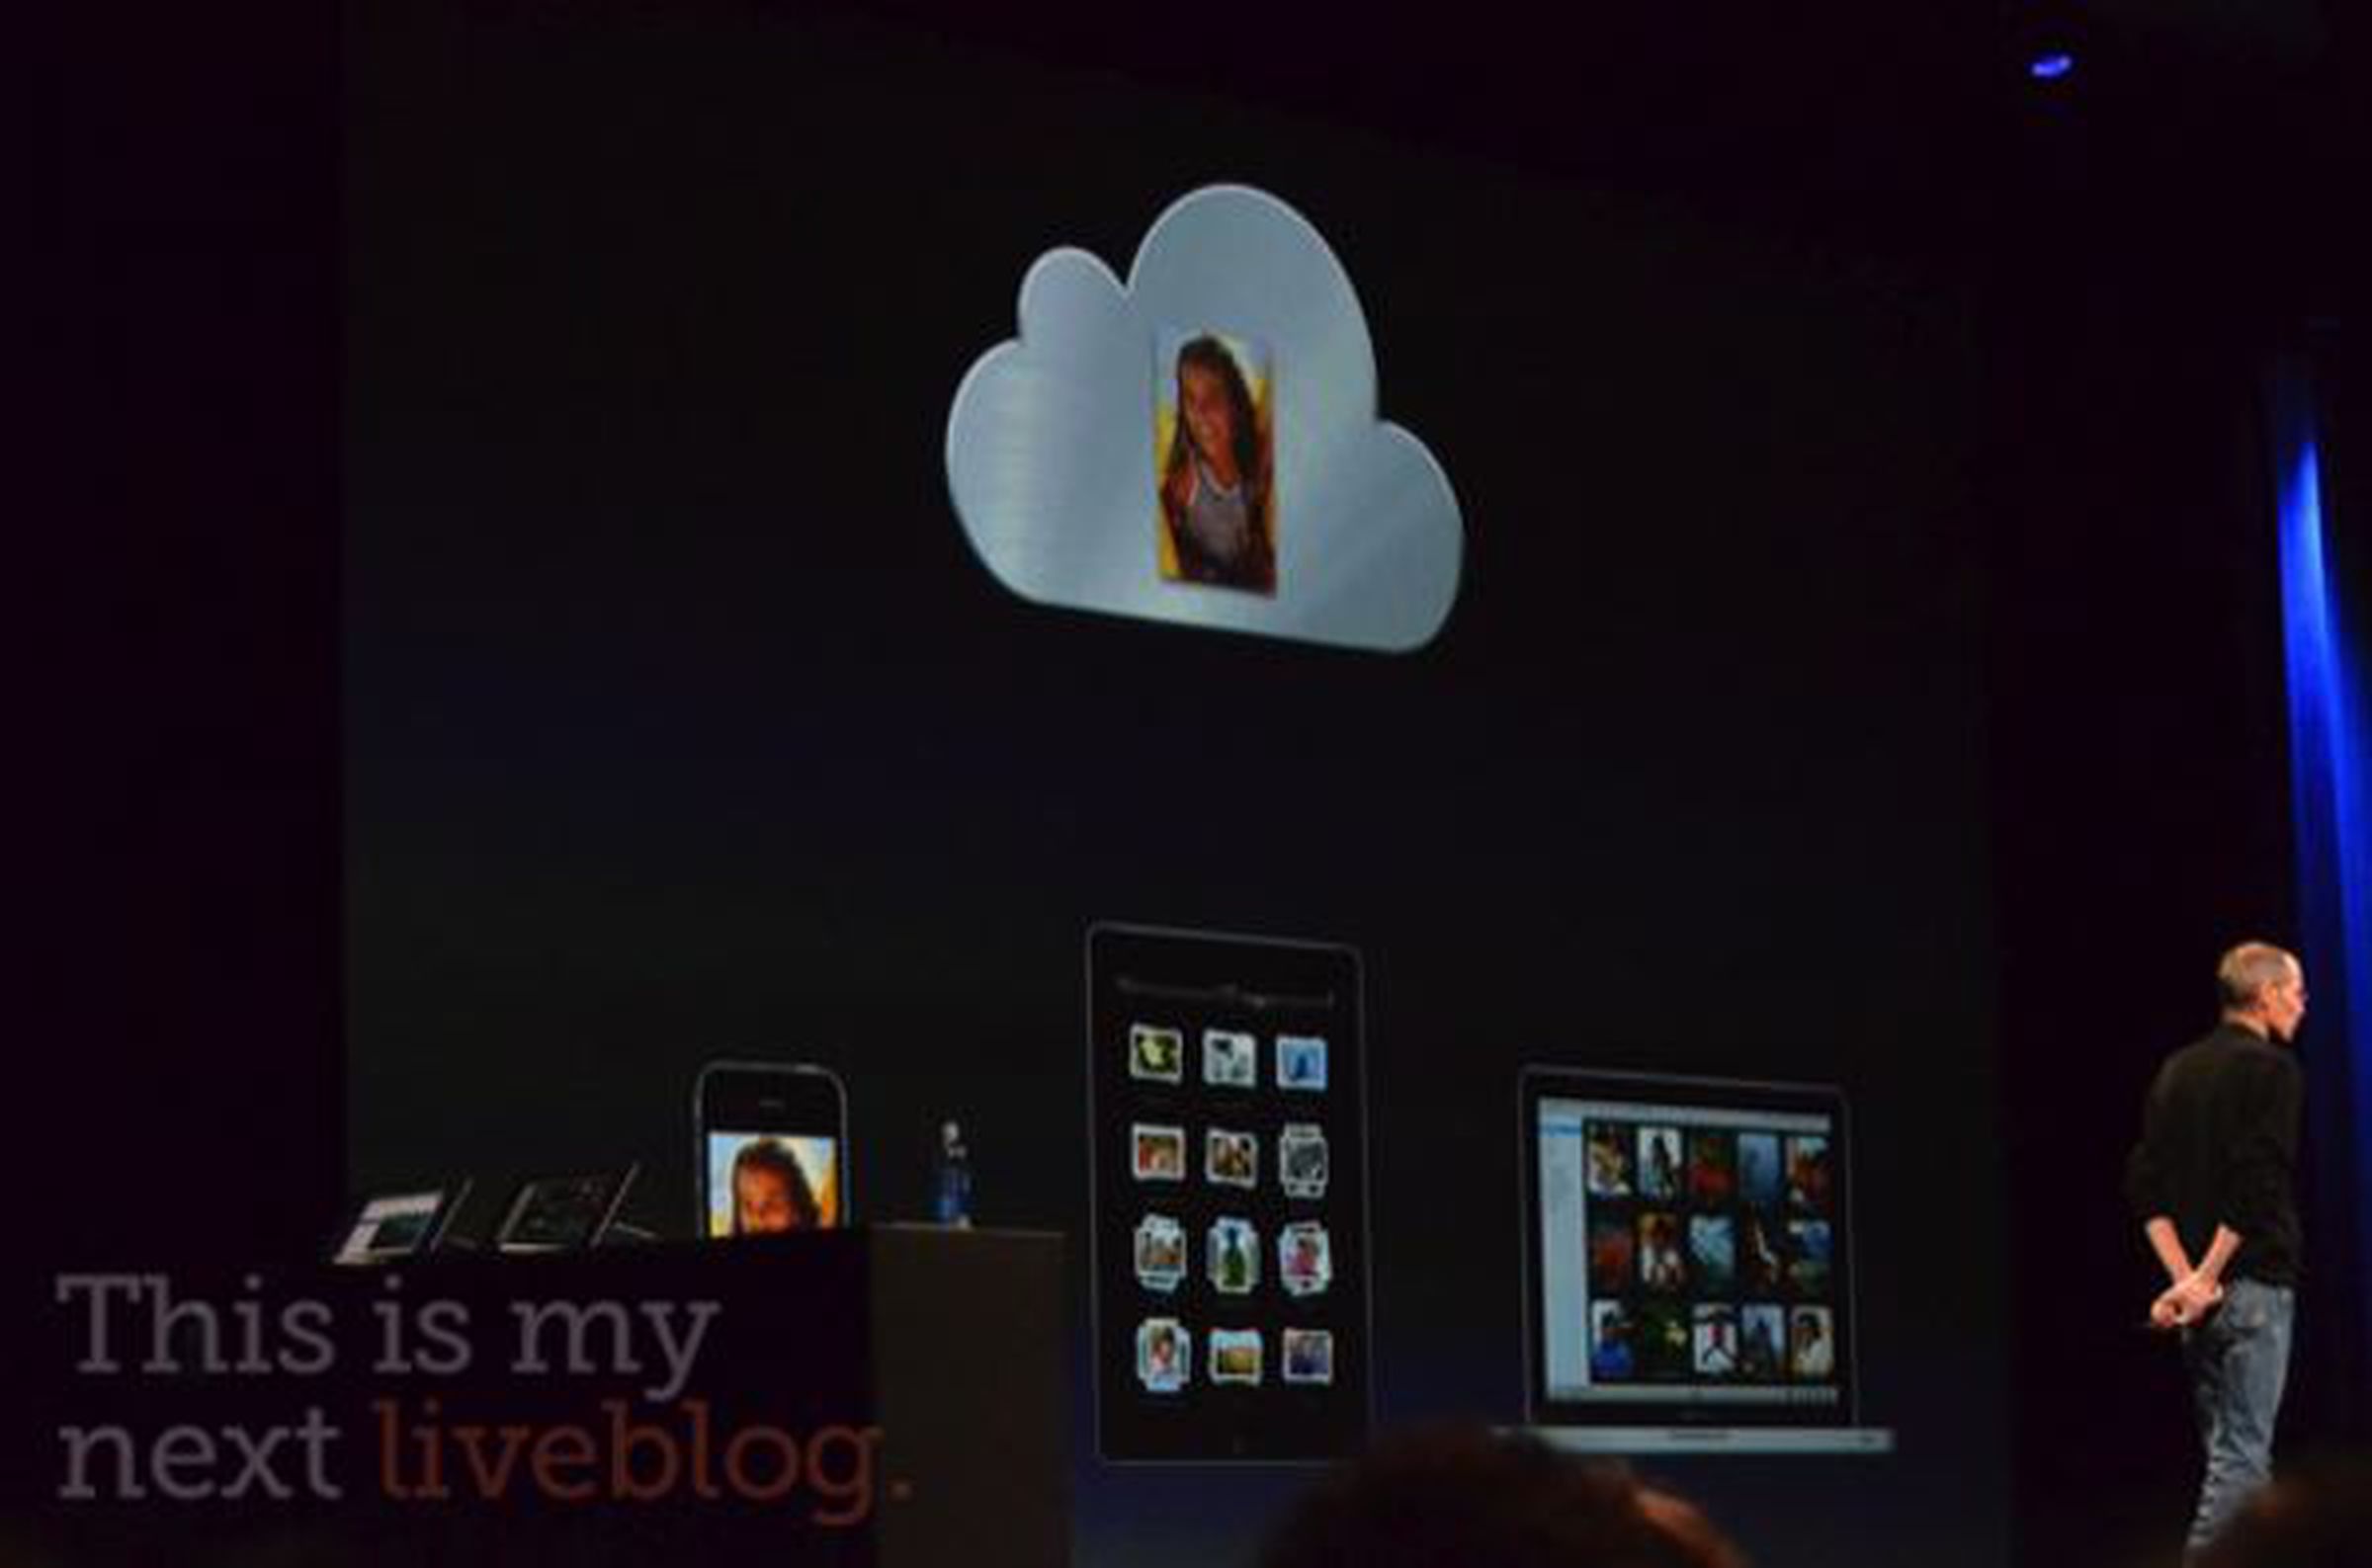 iCloud announced at Apple’s WWDC, available to developers today